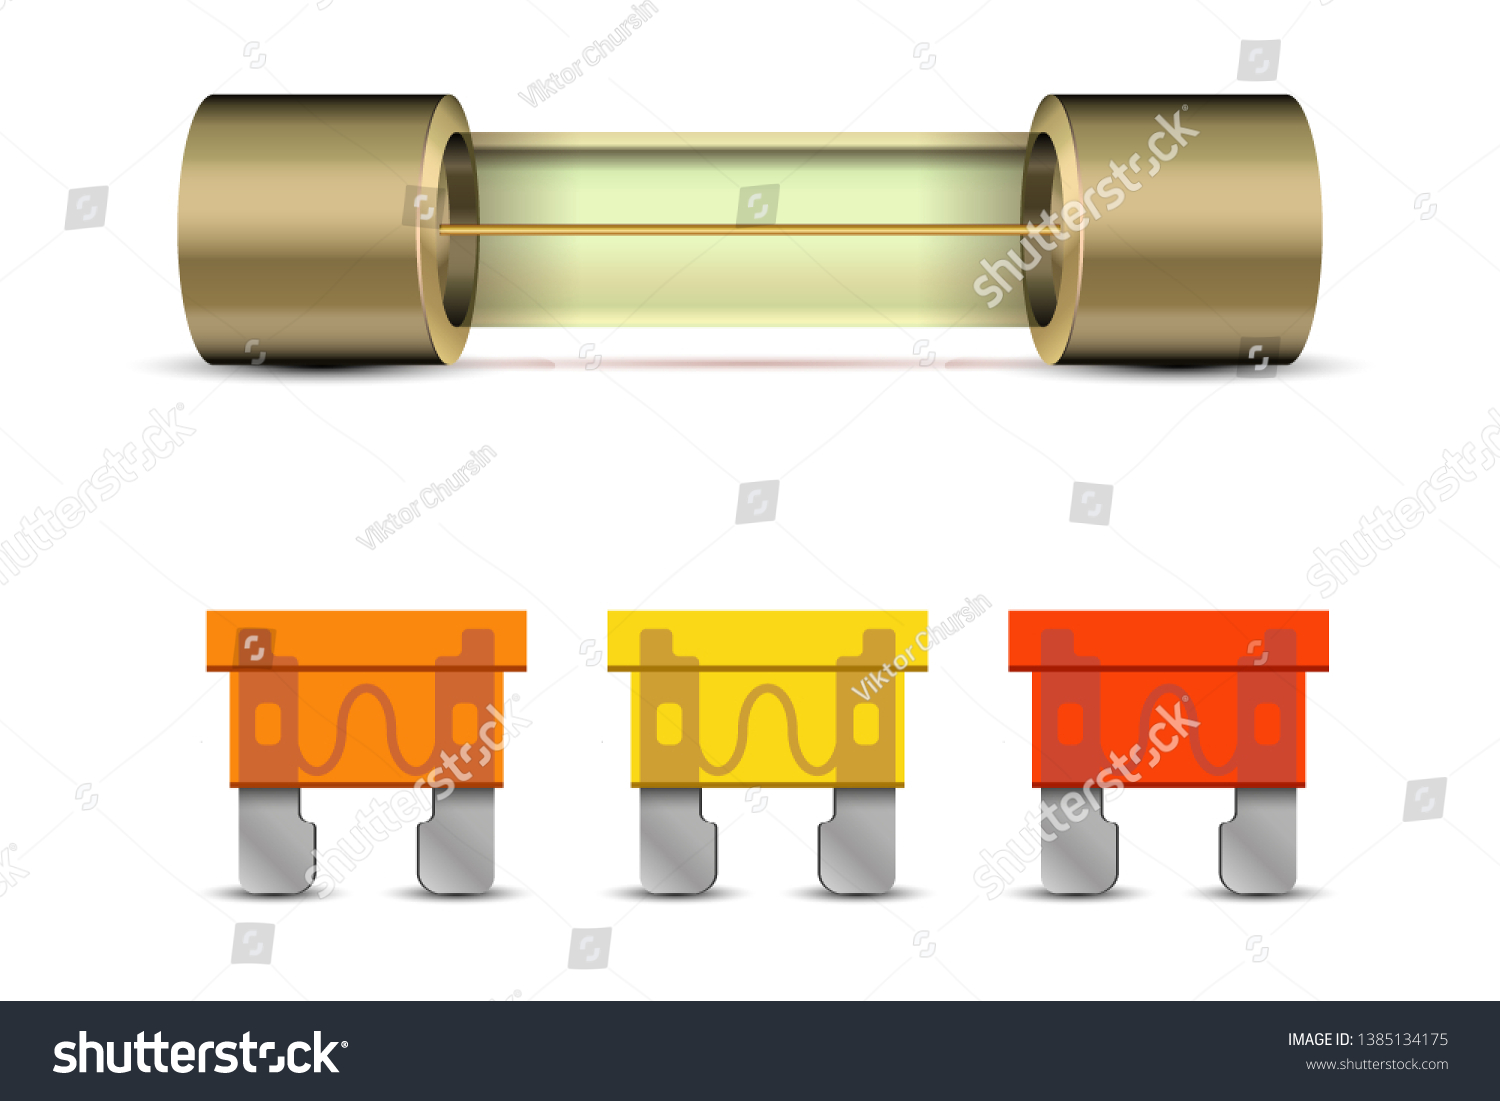 SVG of Fuse of electrical protection component, isolated on white background. Vector illustration.  svg